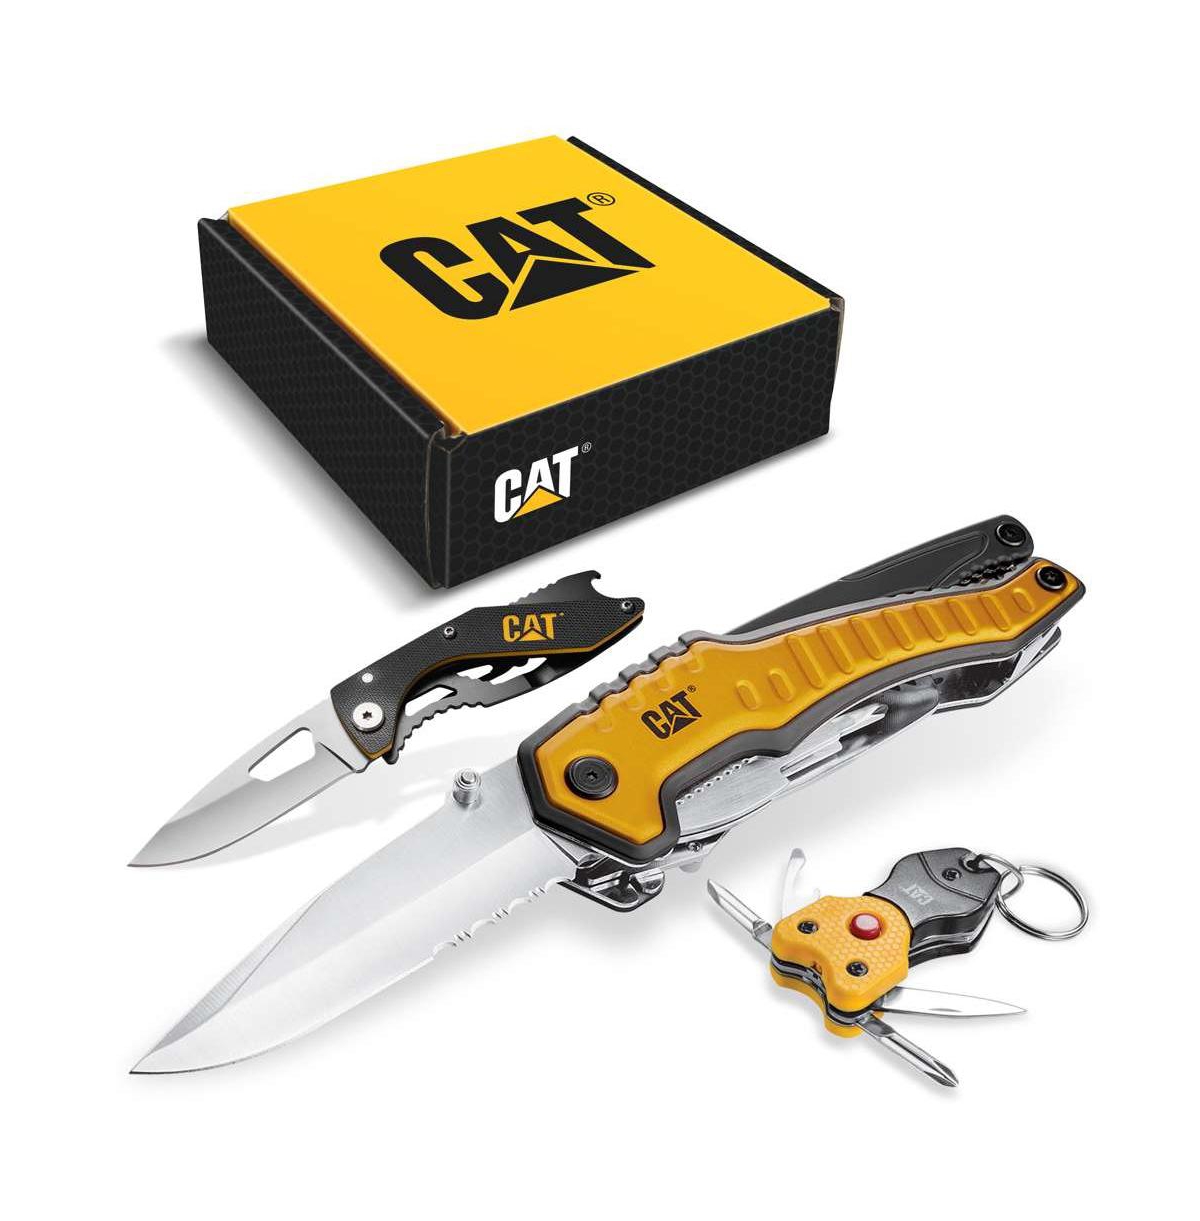 3 Piece 9-in-1 Multi-Tool, Knife, and Multi-Tool Key Chain Gift Box Set - Yellow